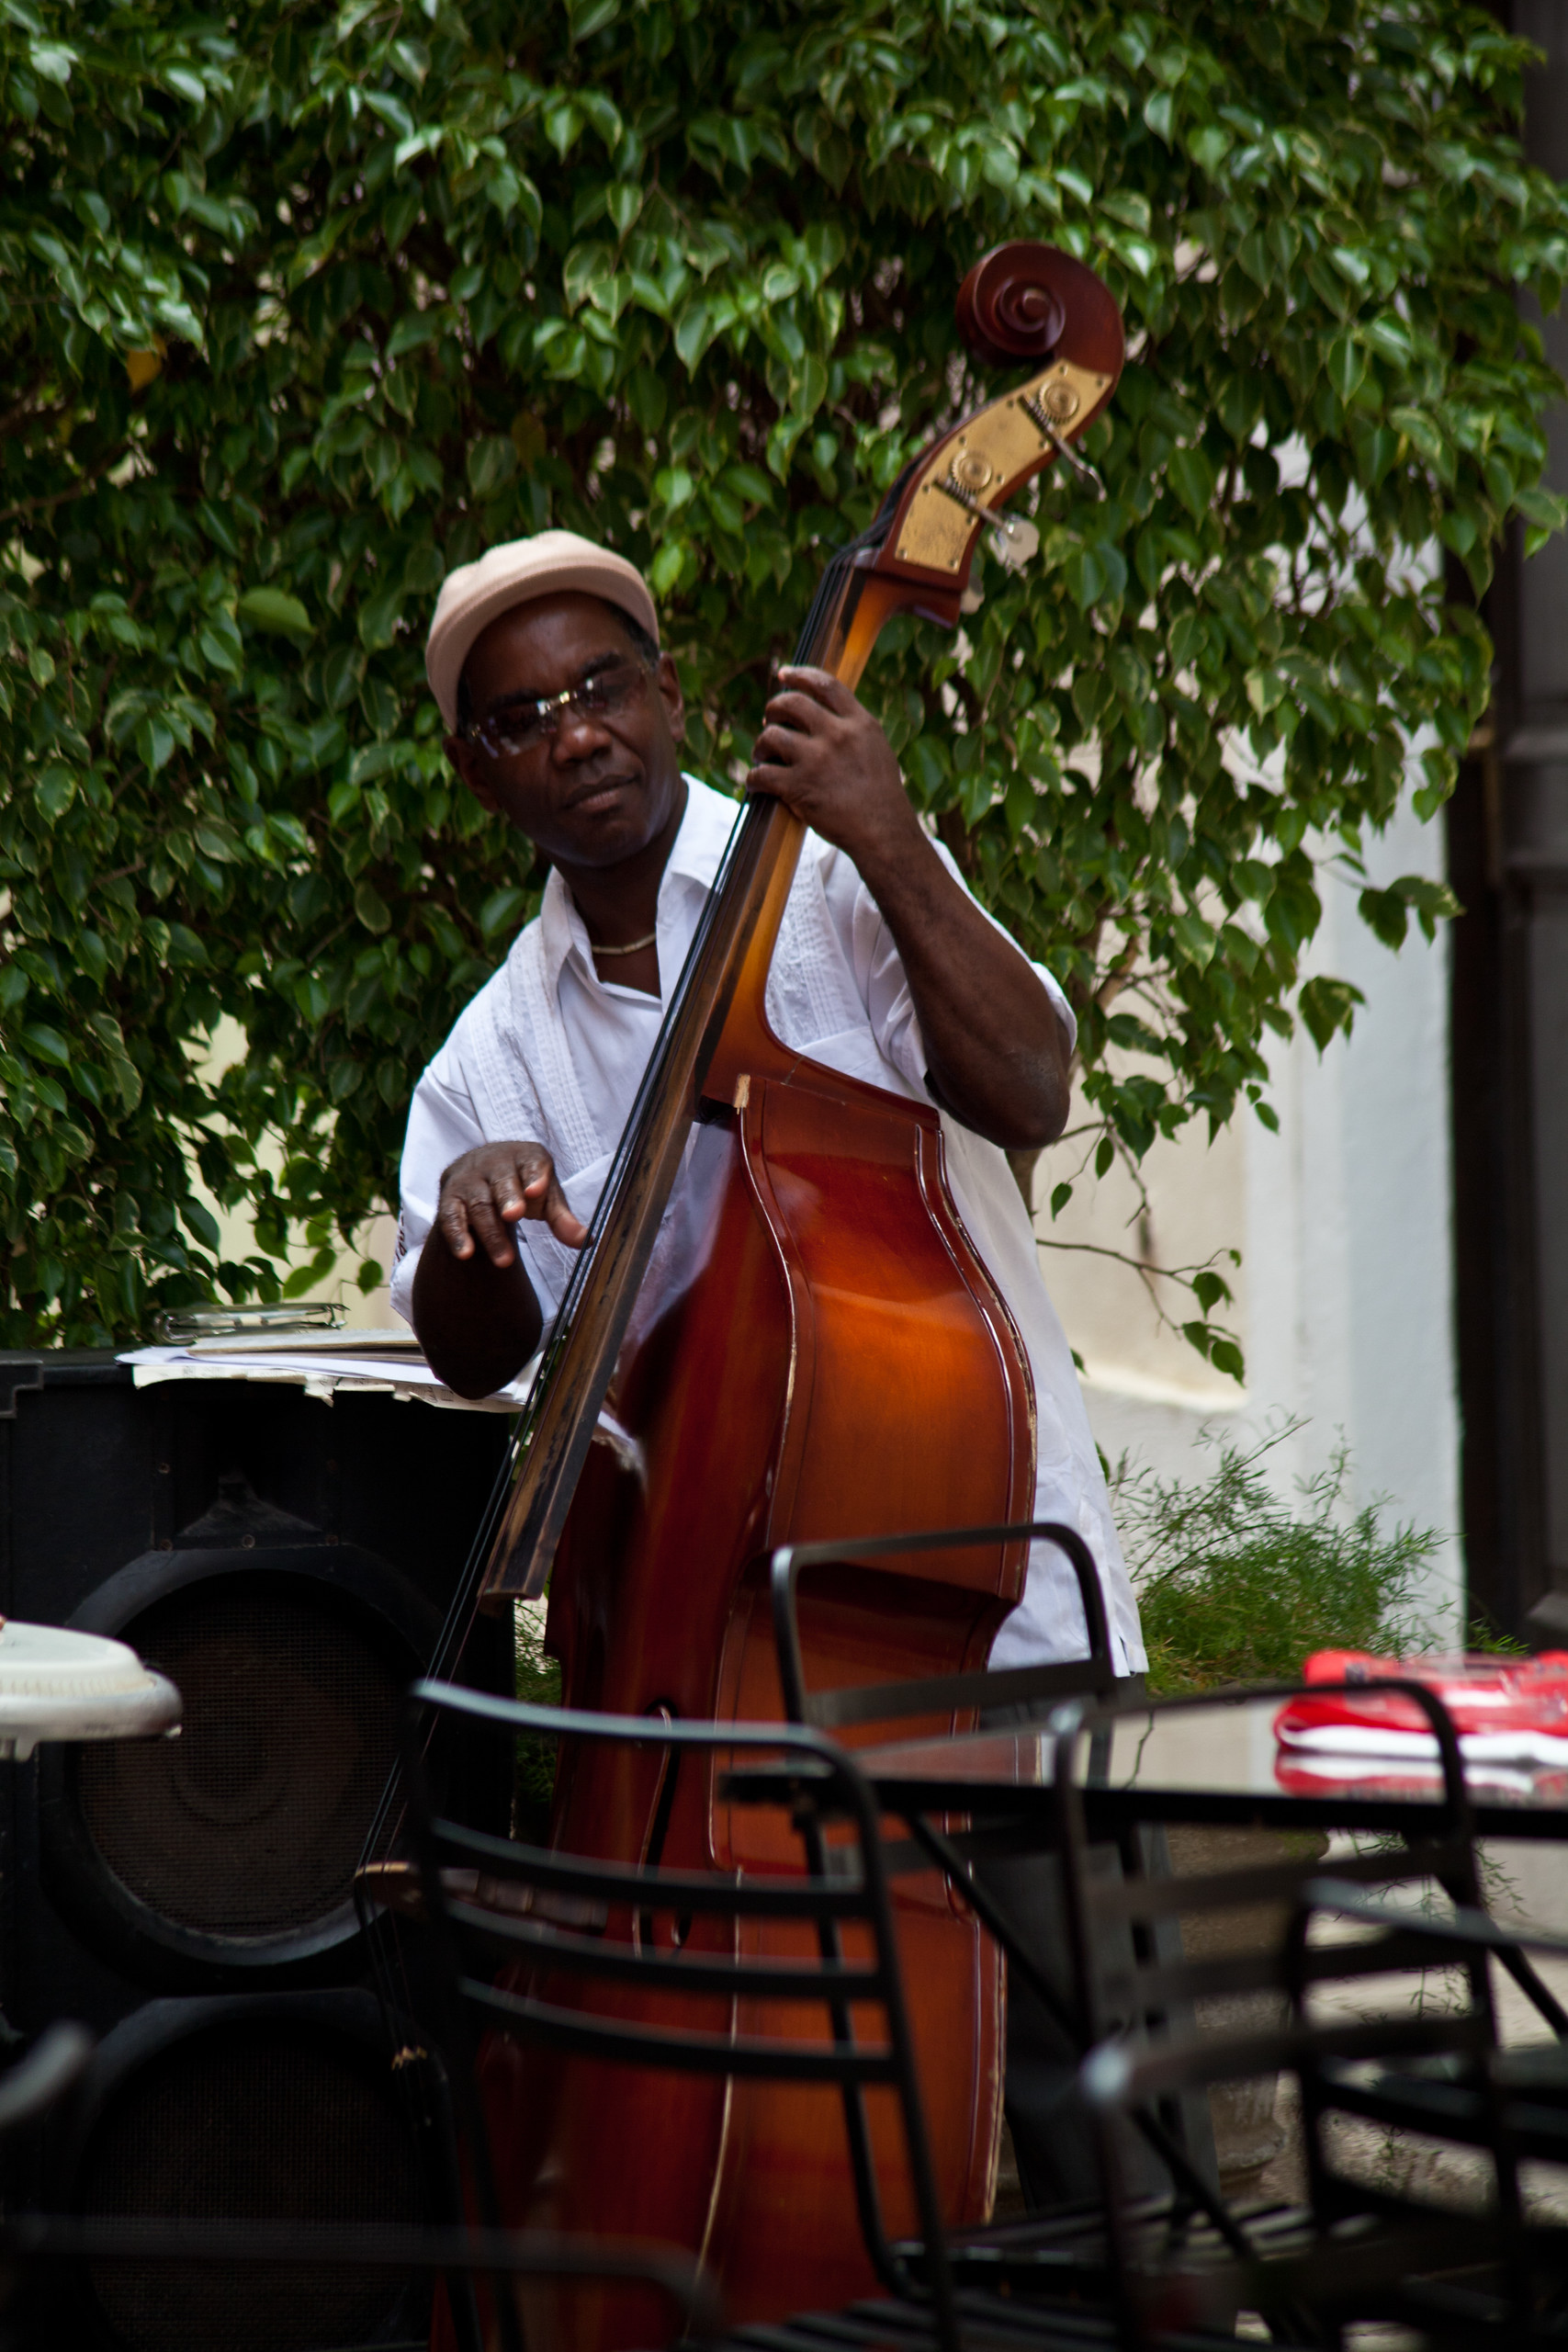 Band members playing in a restaurant in Havana